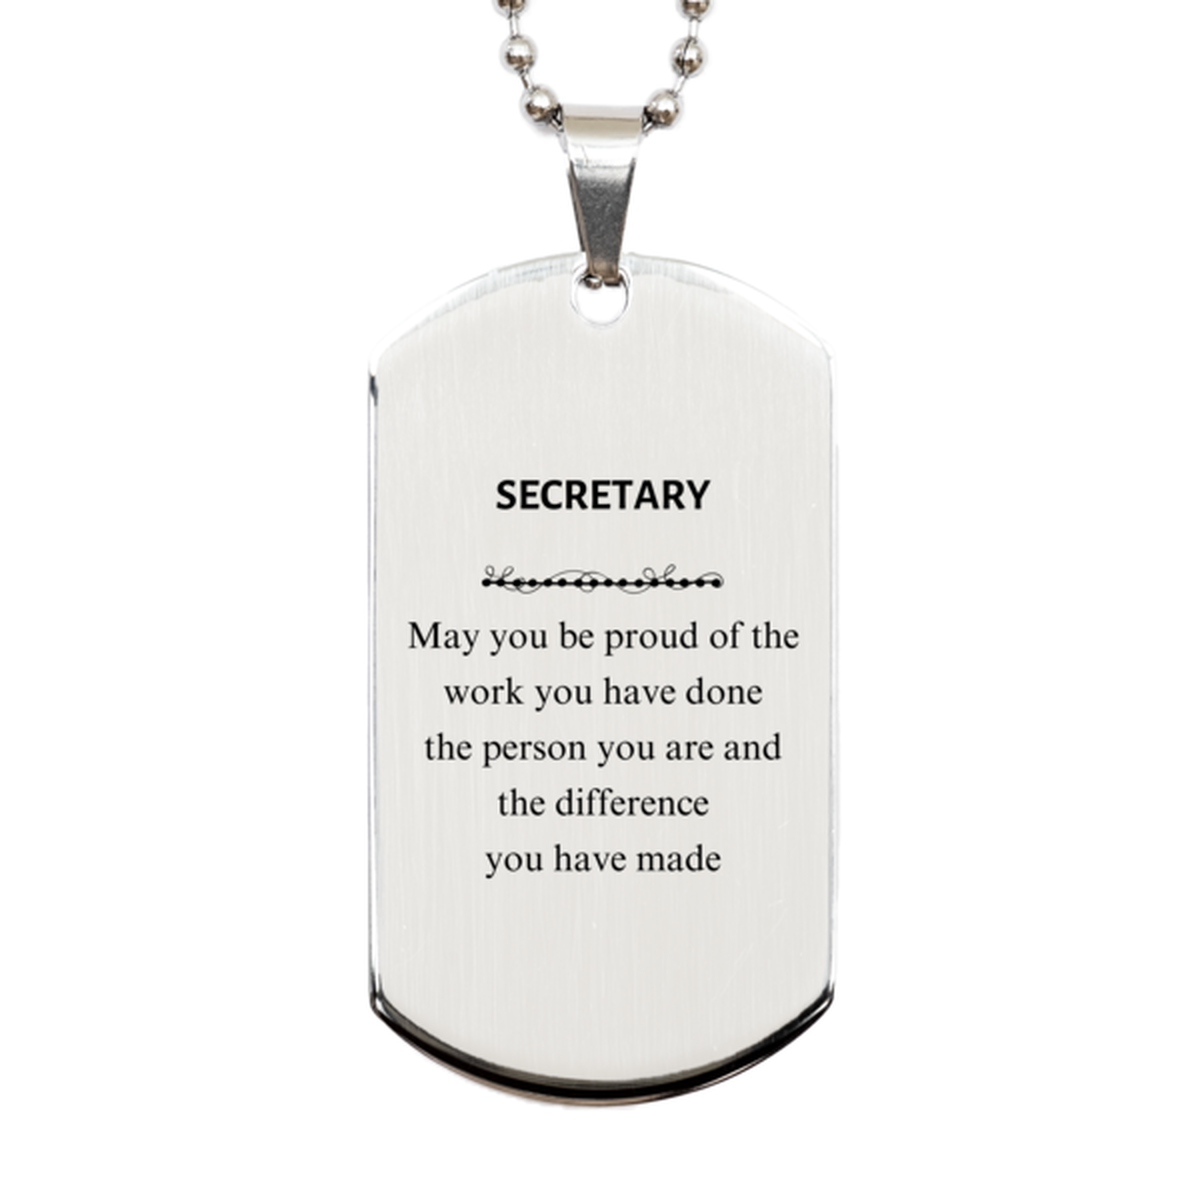 Secretary May you be proud of the work you have done, Retirement Secretary Silver Dog Tag for Colleague Appreciation Gifts Amazing for Secretary